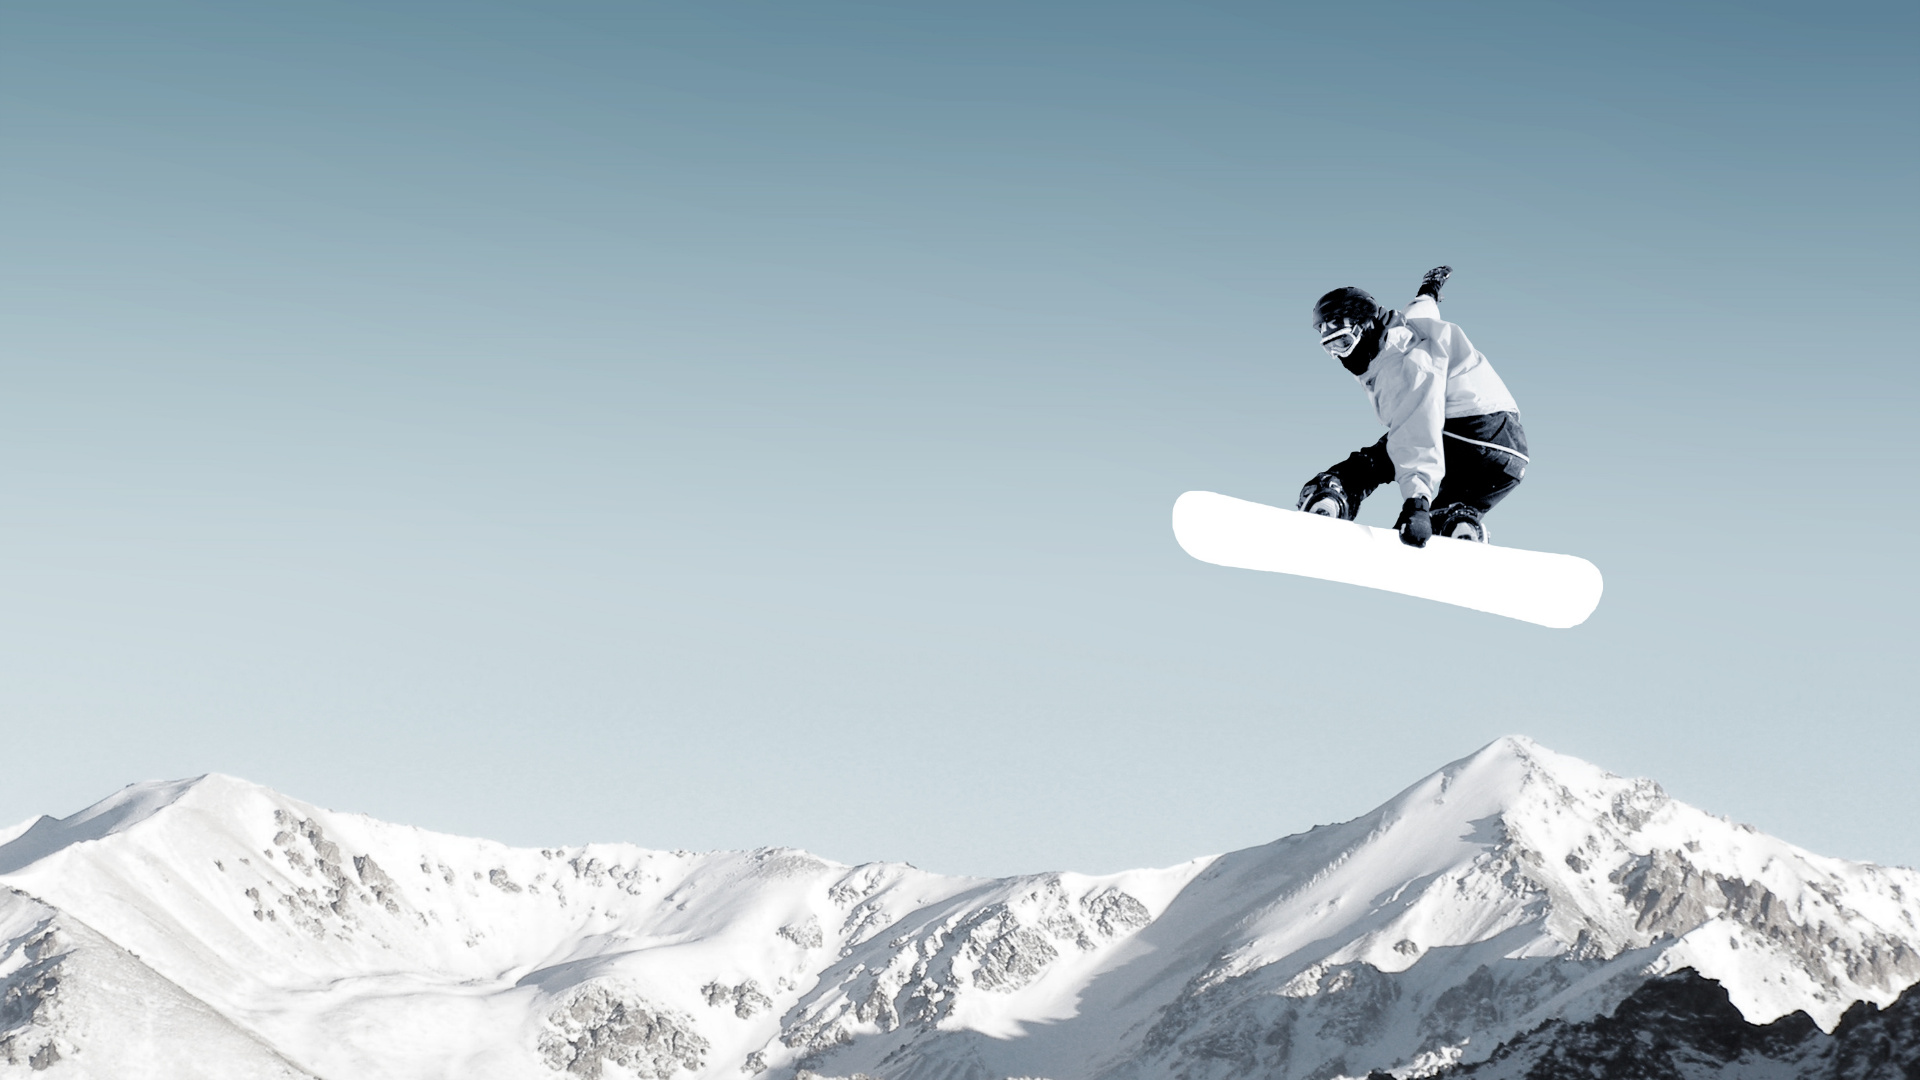 Snowboarding: Aerial tricks by a professional snowboarder, Outdoor recreation and extreme sport. 1920x1080 Full HD Wallpaper.